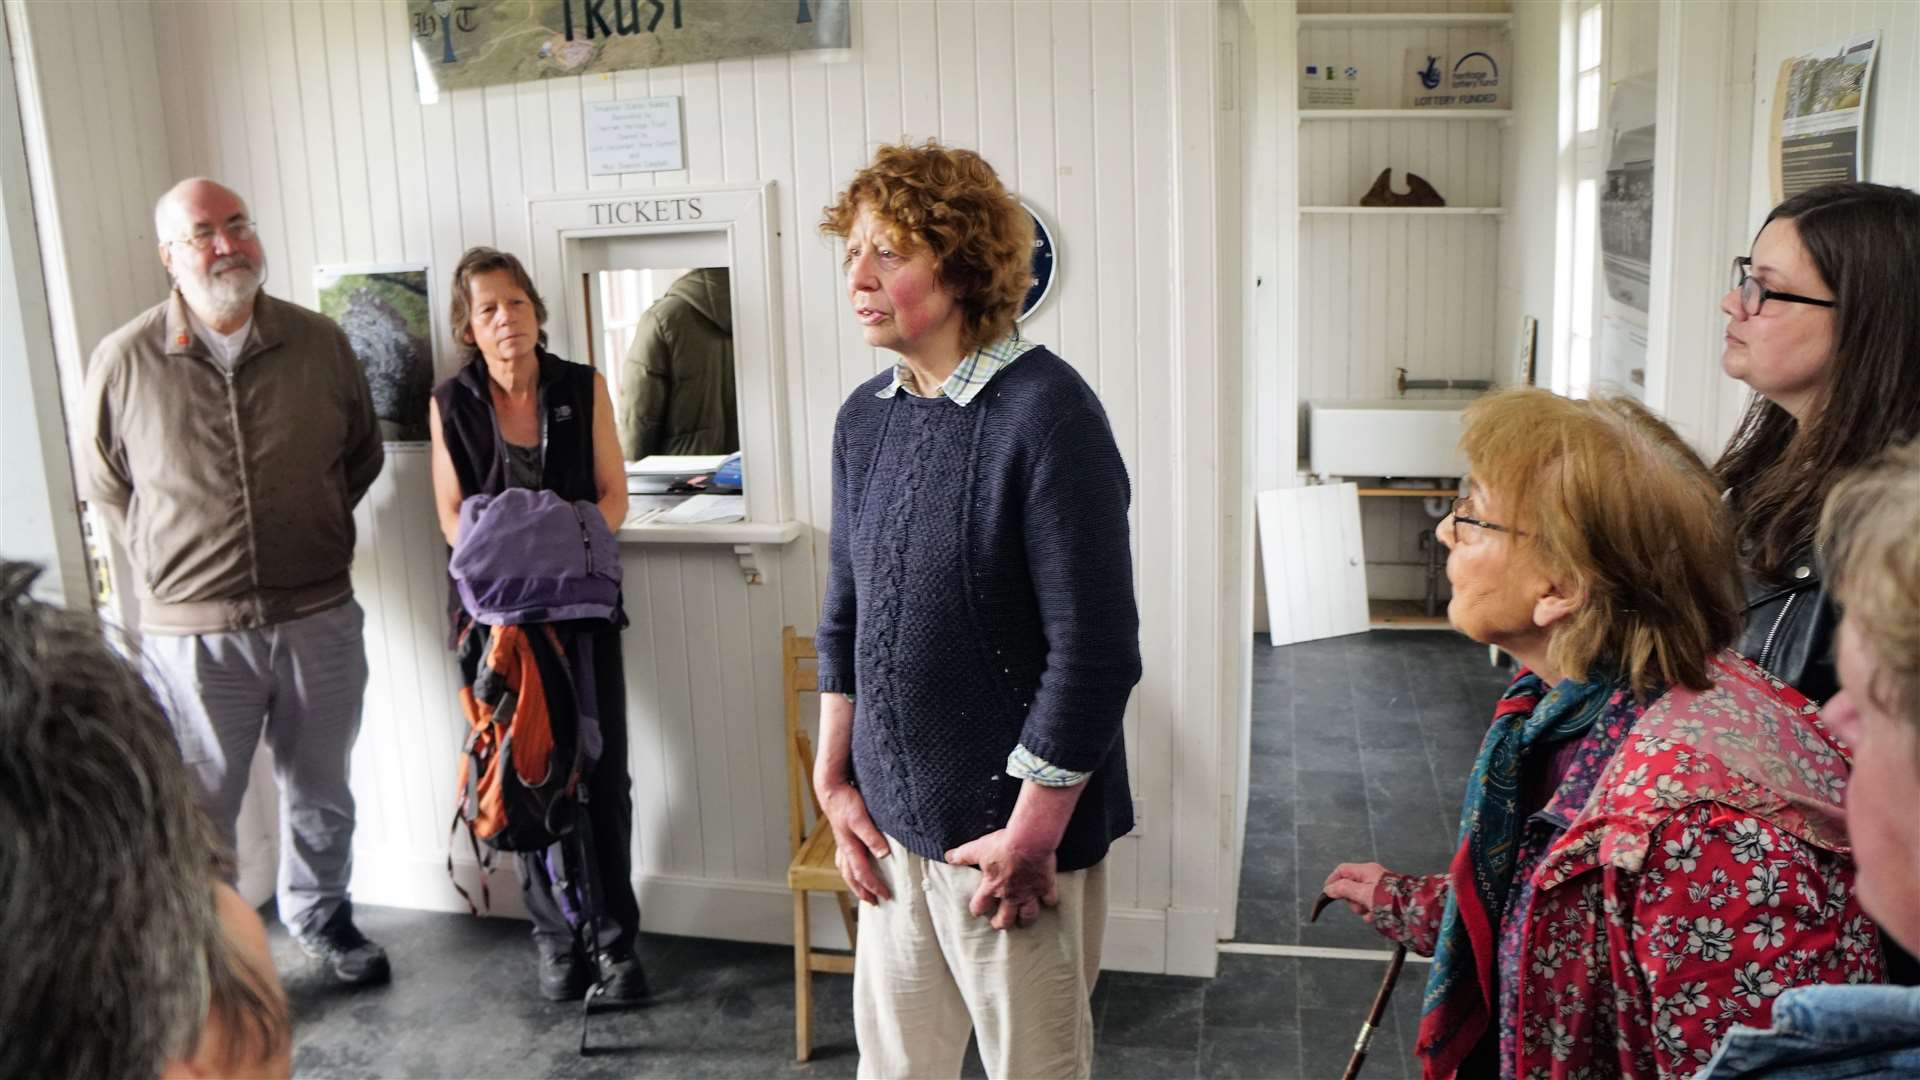 Islay MacLeod from the Yarrows Heritage Trust was hosting the event and welcomed the visitors. Picture: DGS